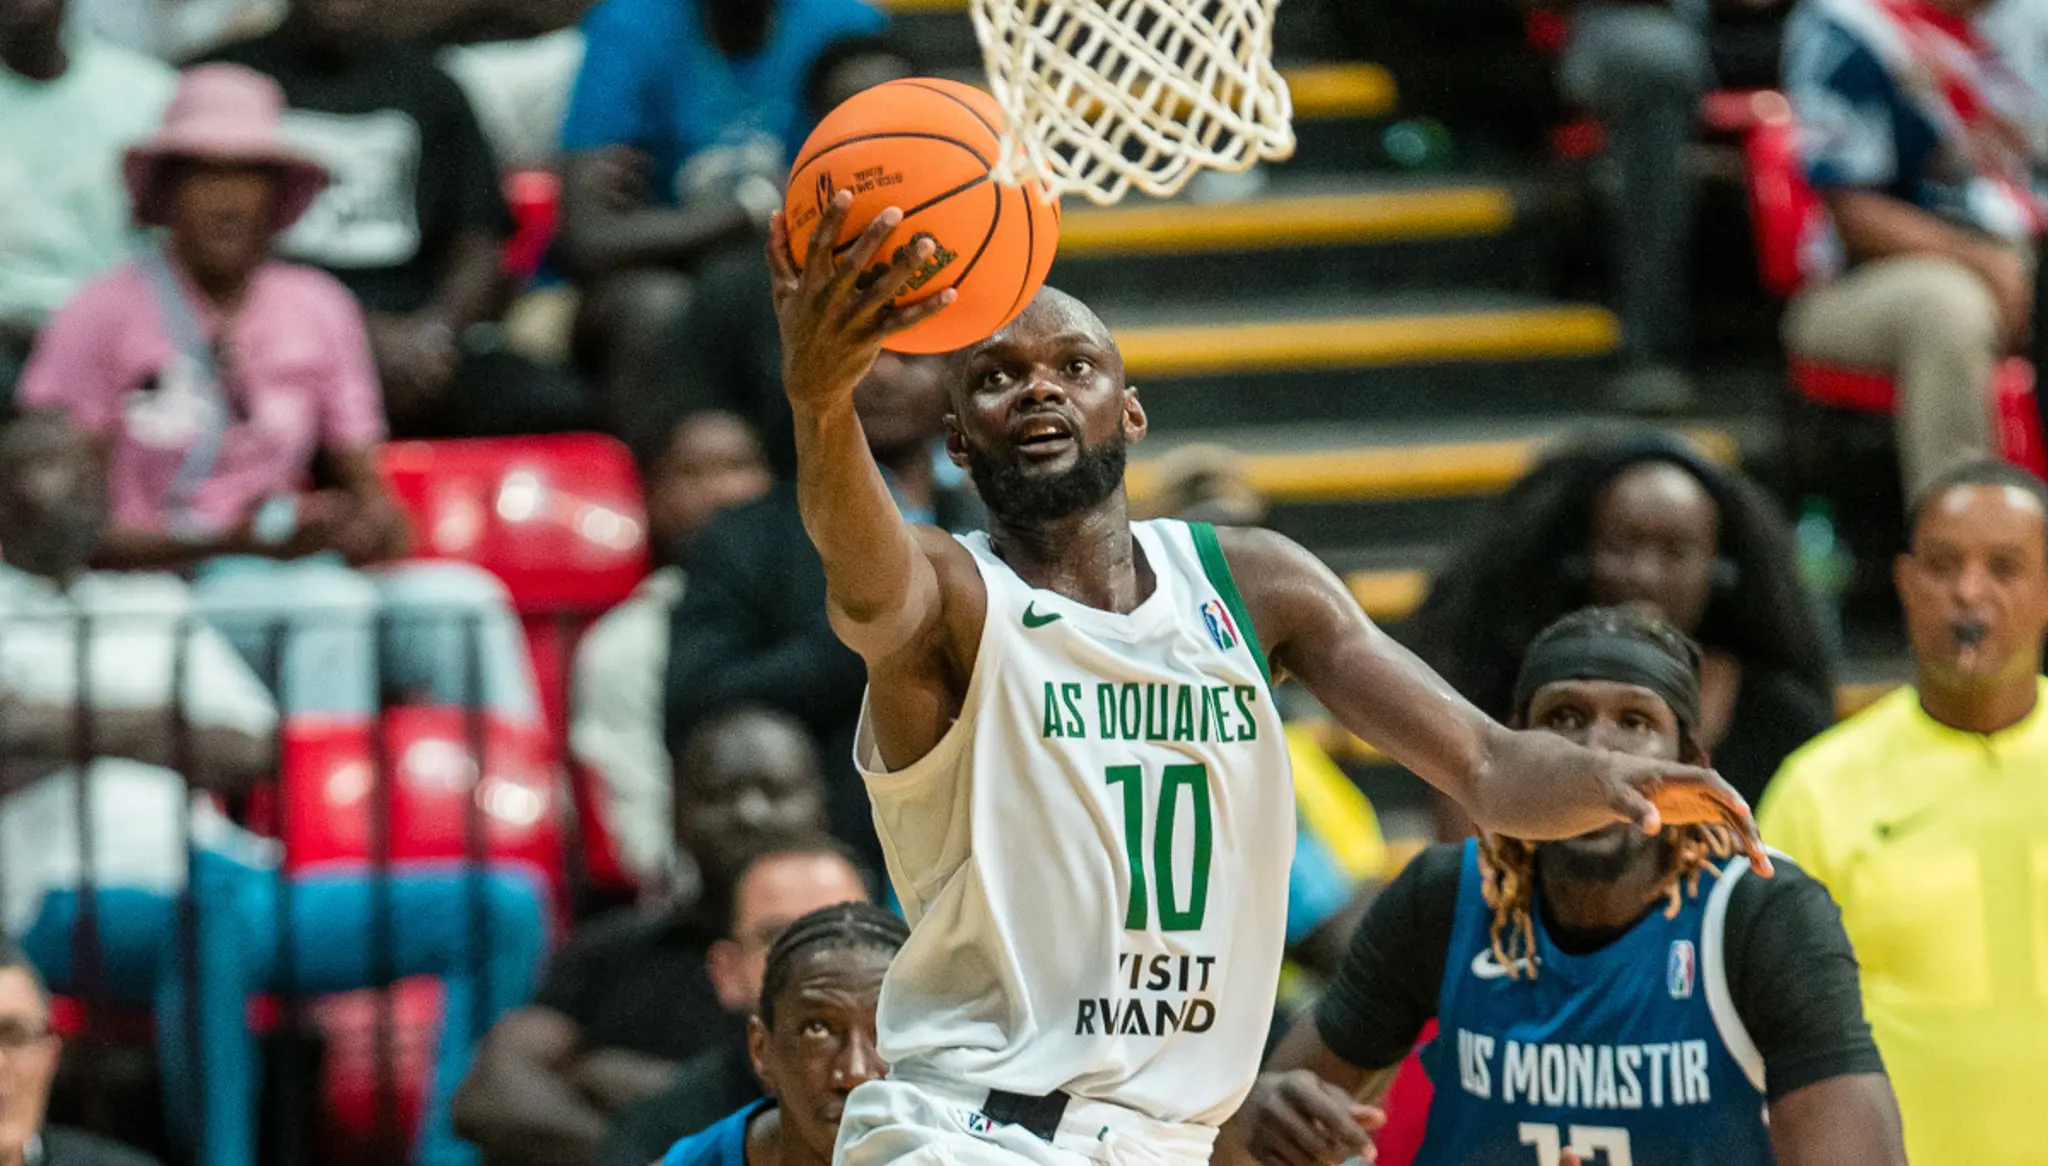 Nigeria’s Rivers Hoopers Win Second Straight Game, Lead Sahara Conference